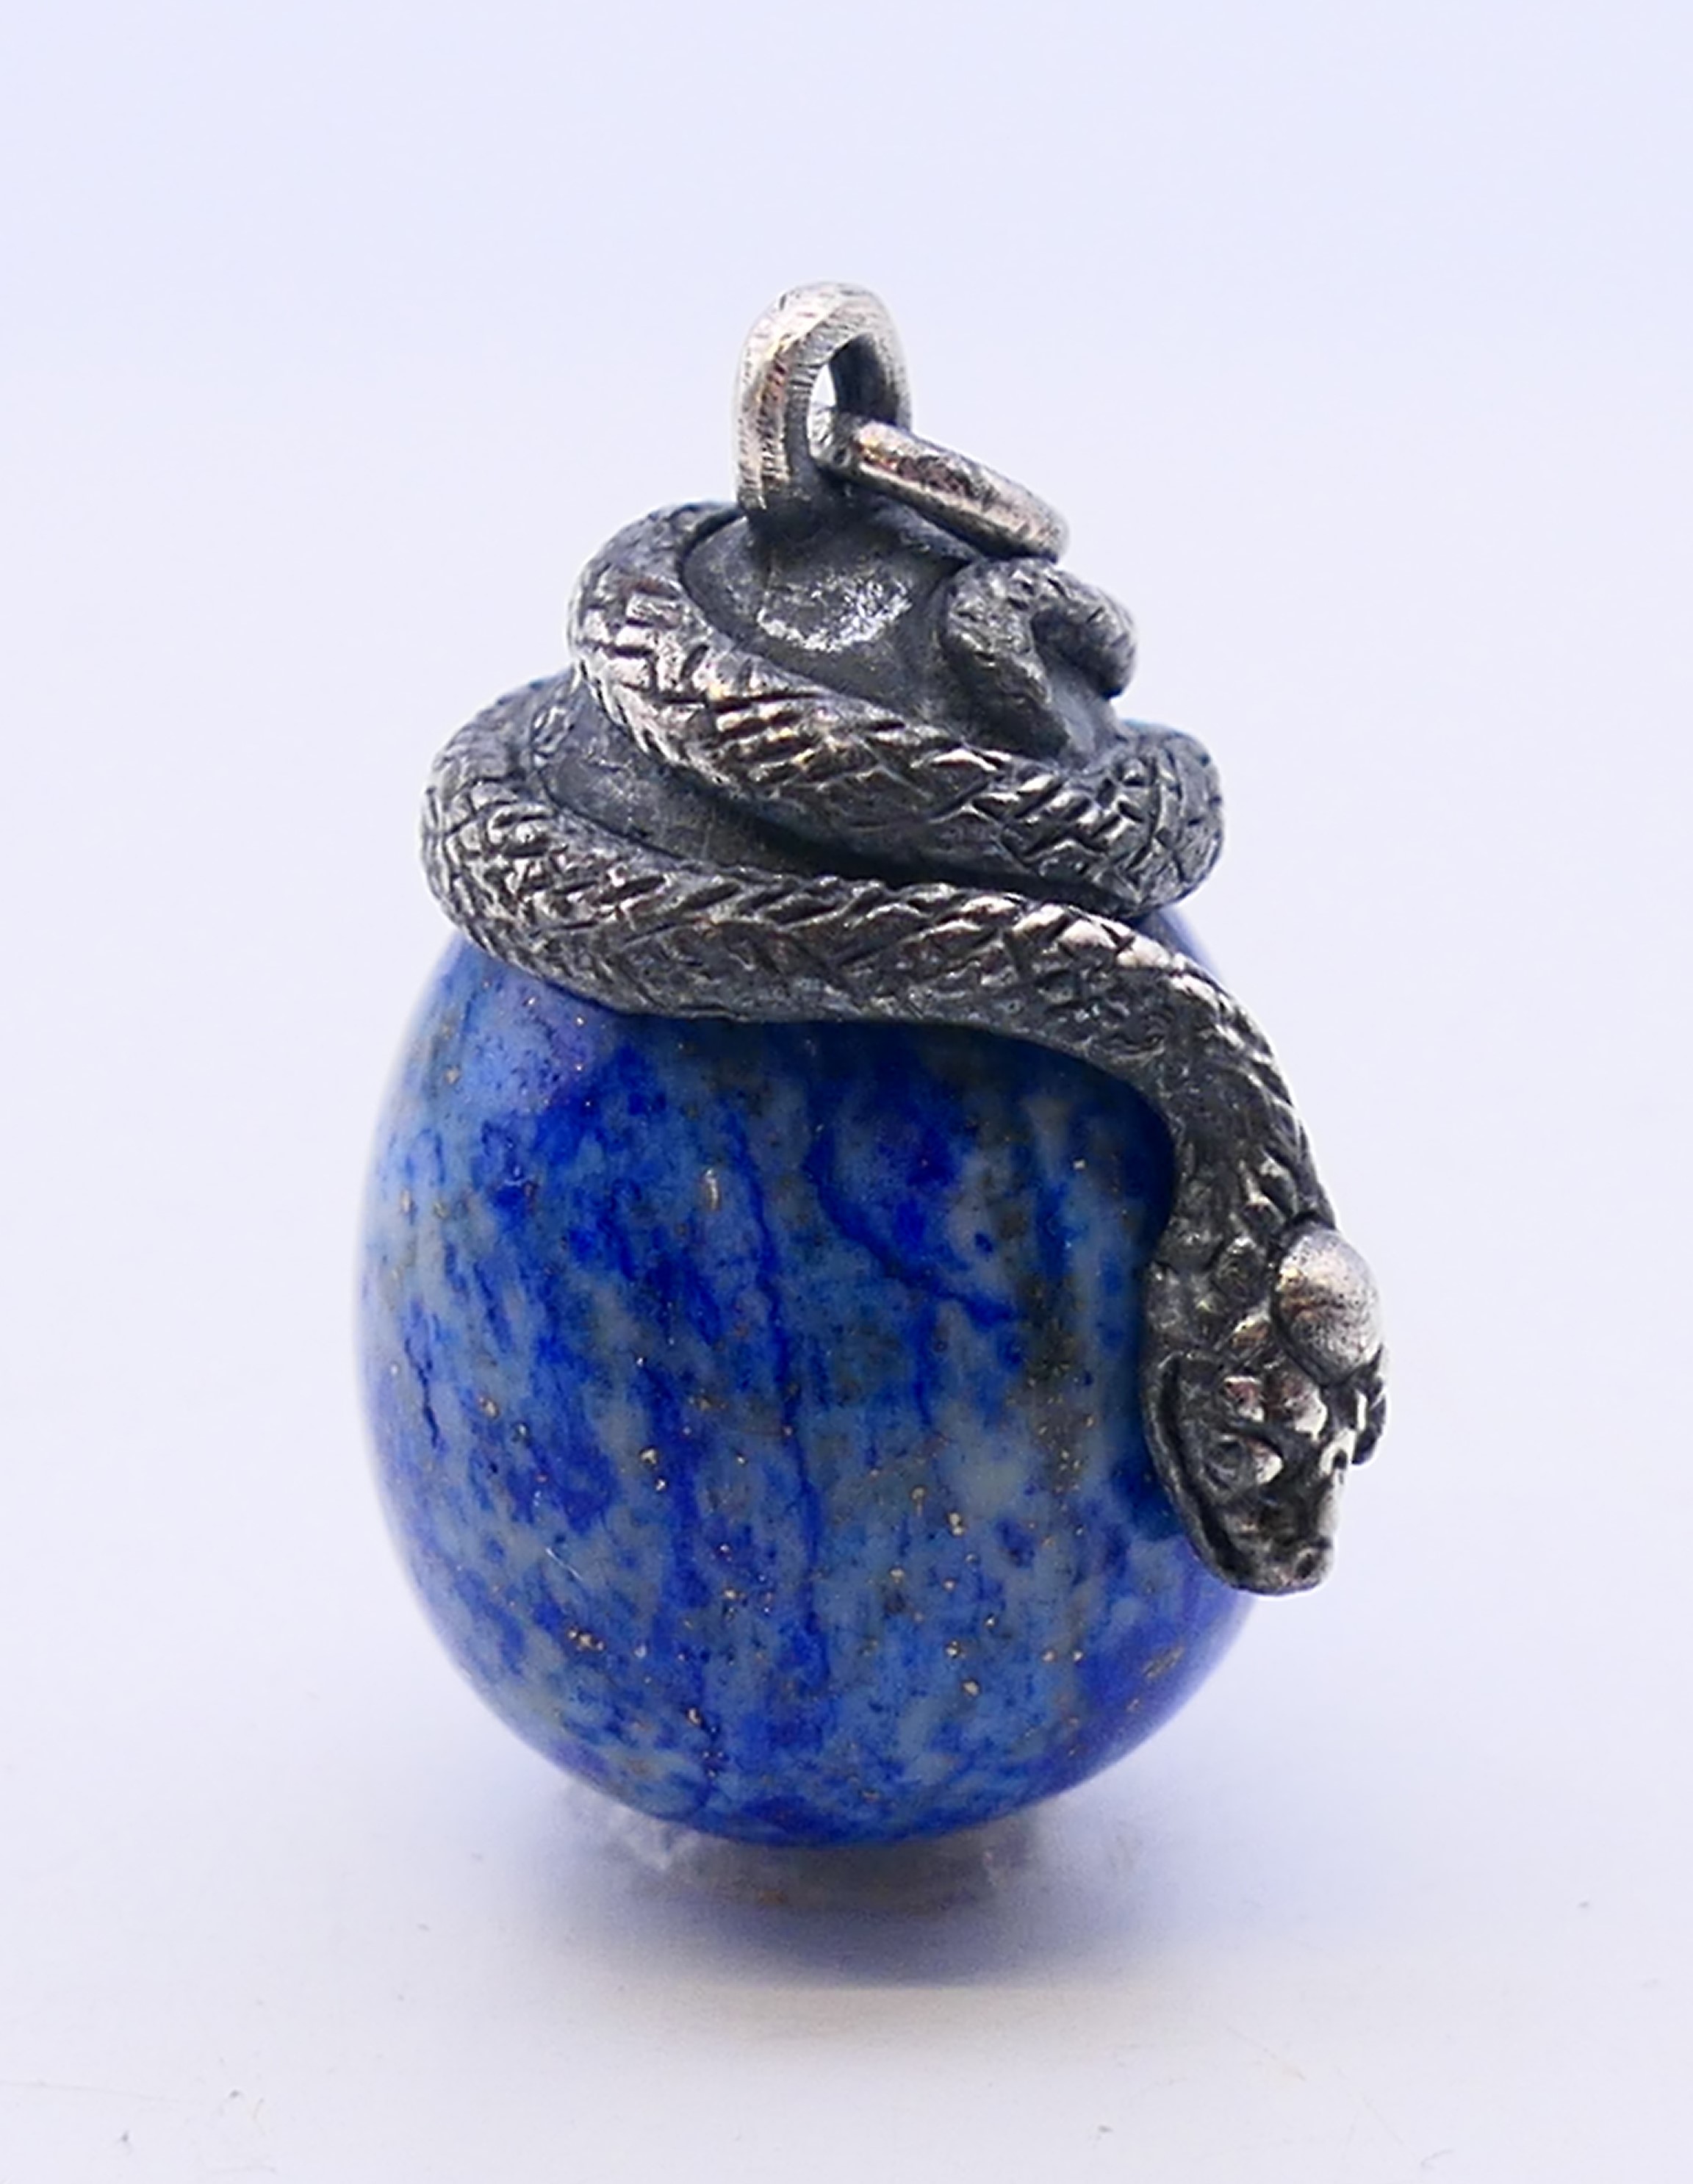 A silver and lapiz egg and snake pendant. 2.5 cm high. - Image 2 of 4